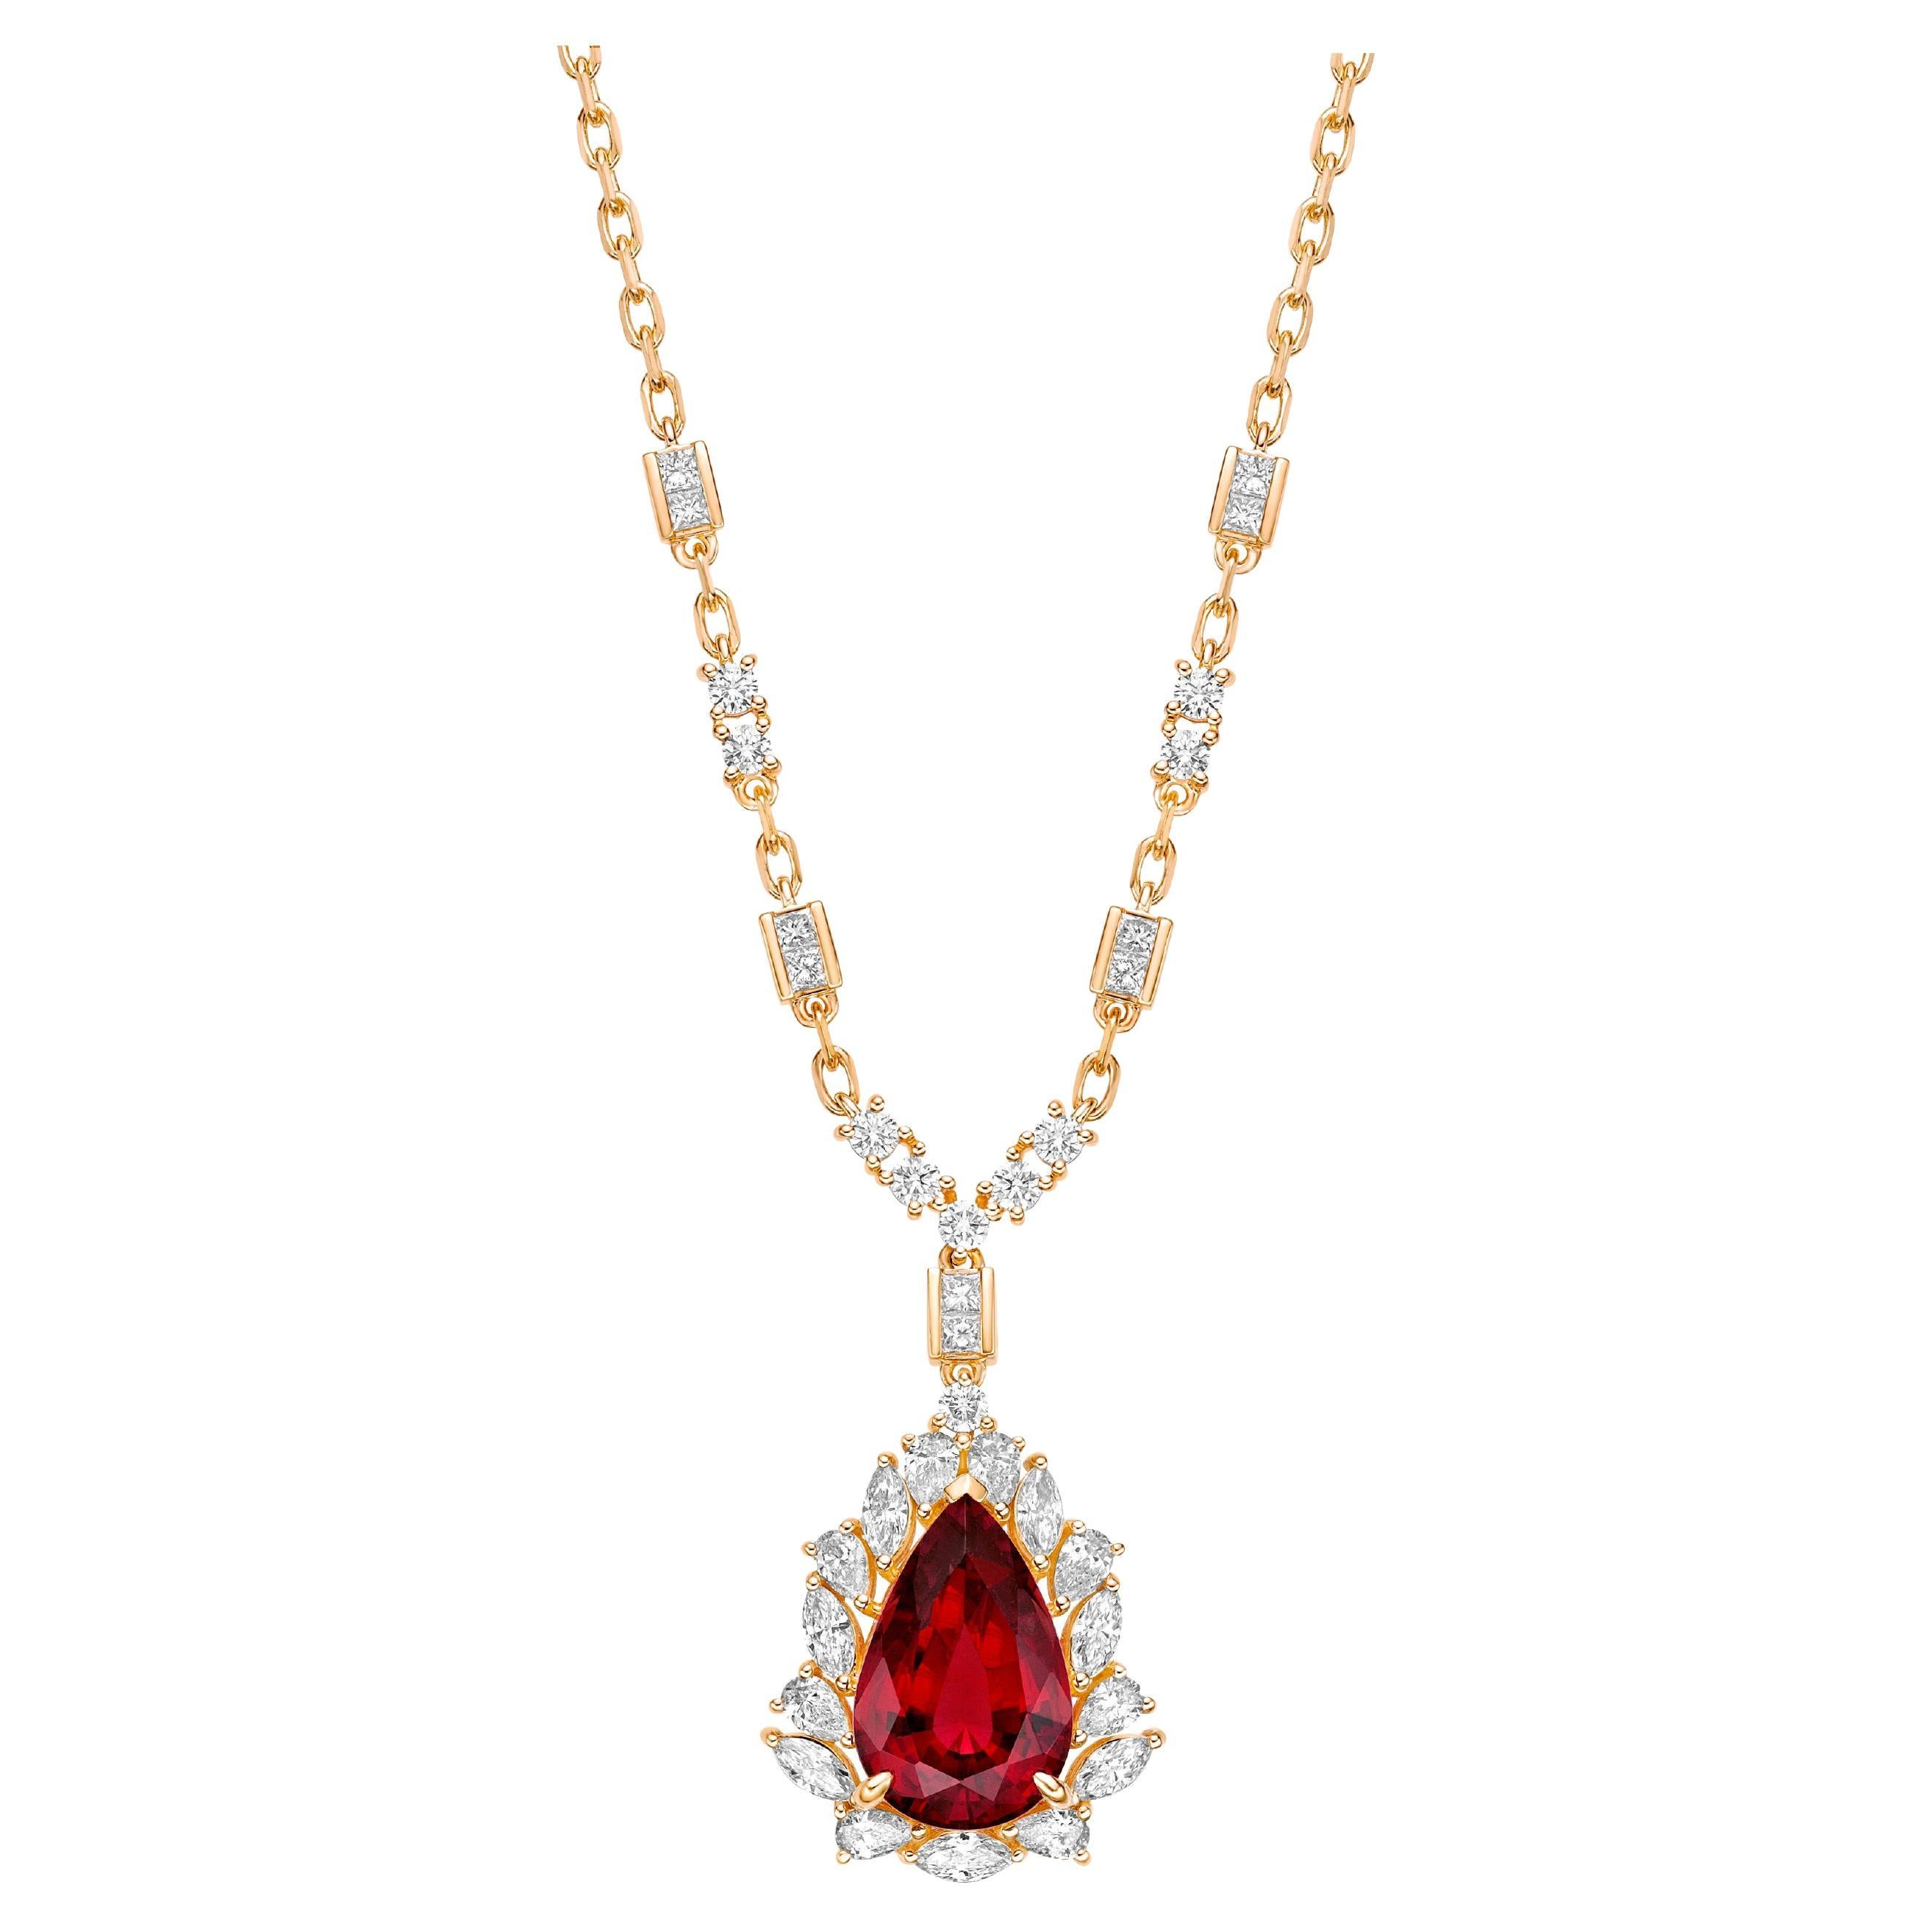 8.047 Carat Rubellite Necklace in 18Karat Yellow Gold with White Diamond. For Sale